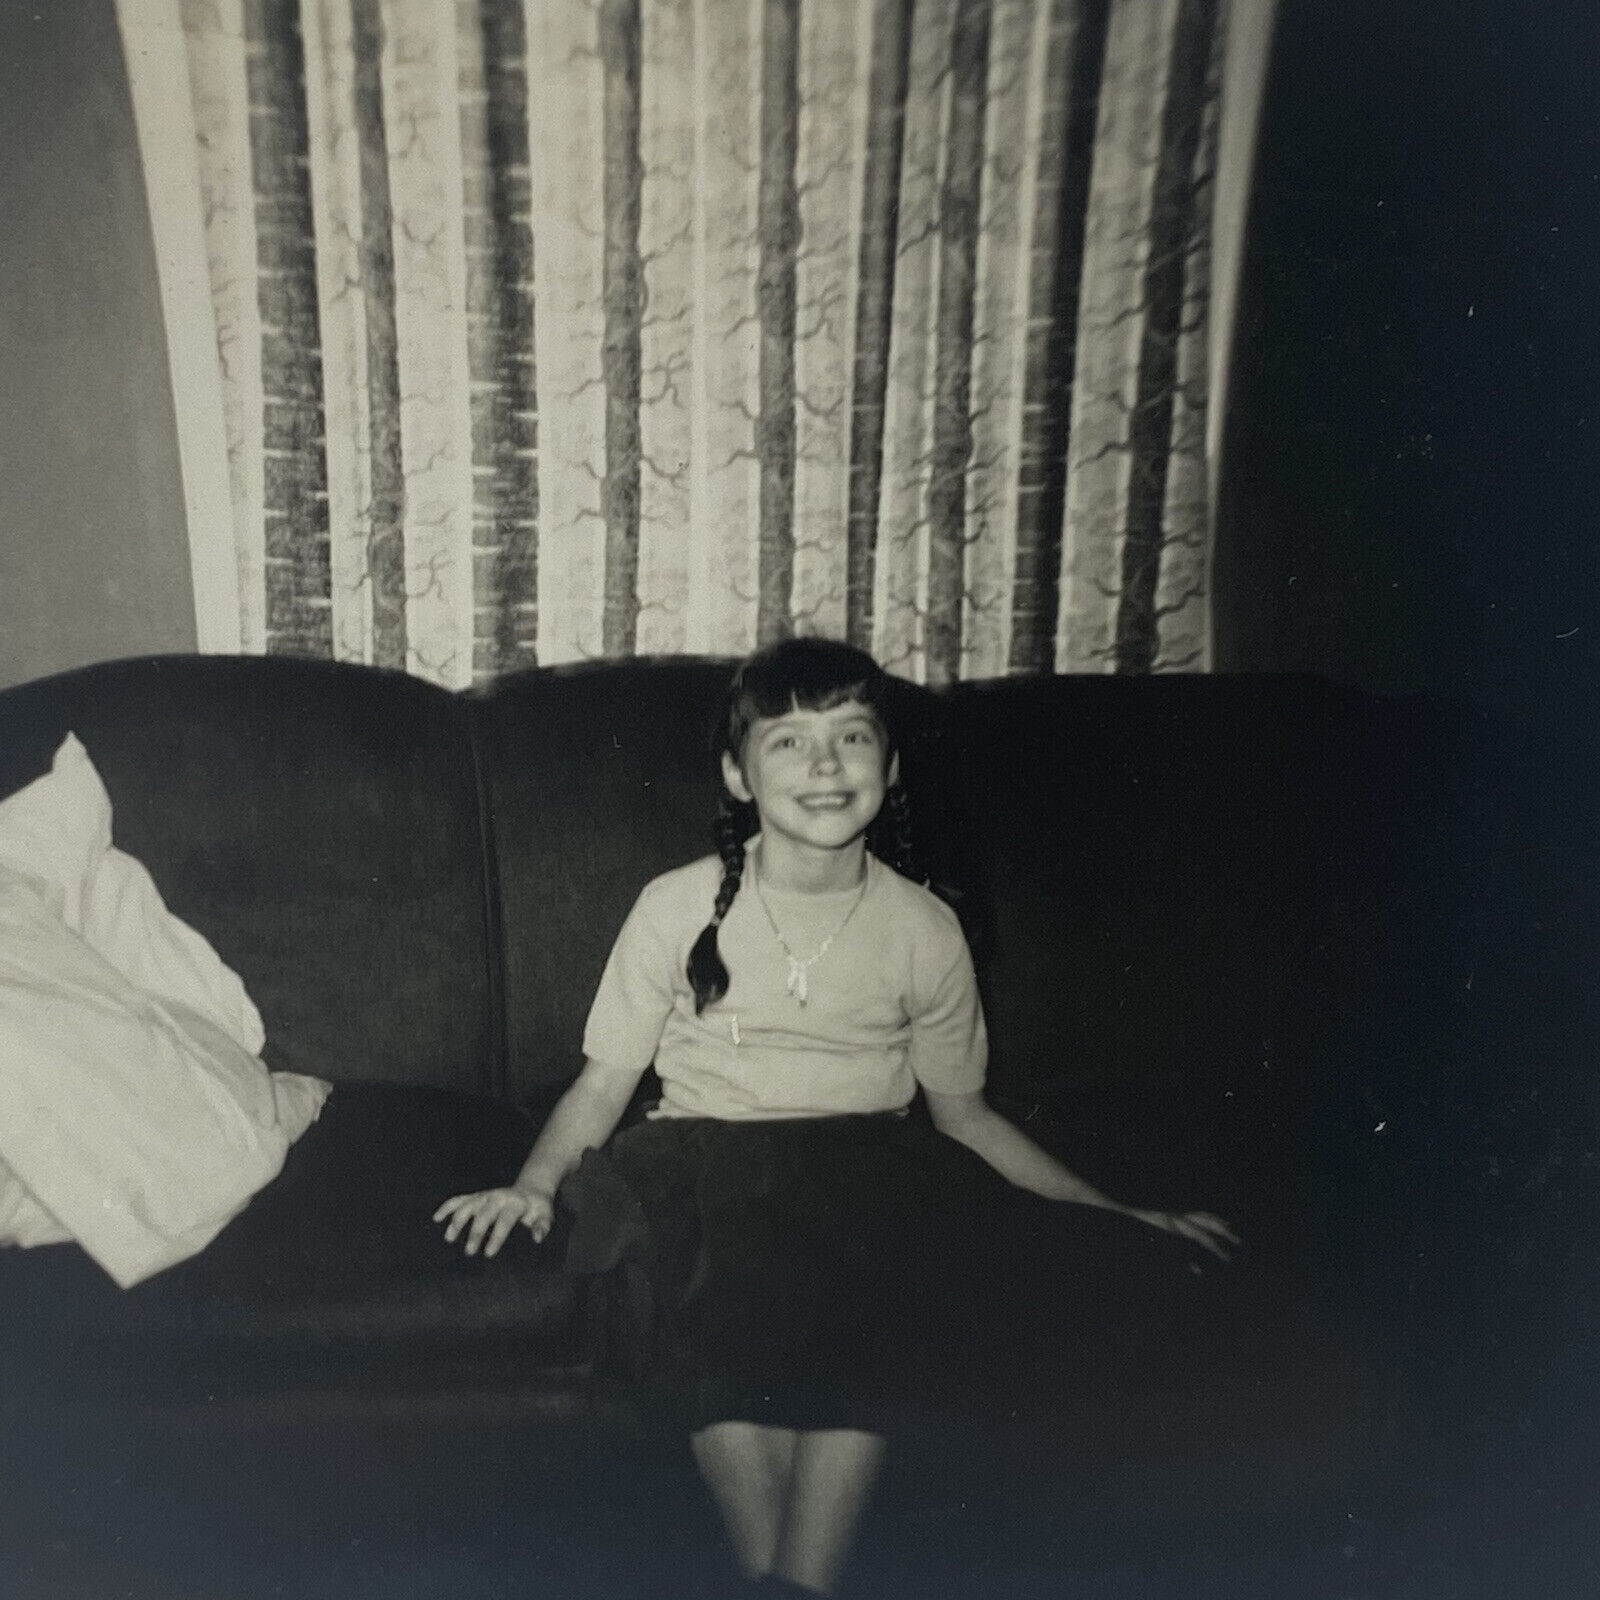 Vintage Photo 1955 Girl Smiling Posed On Couch Sitting